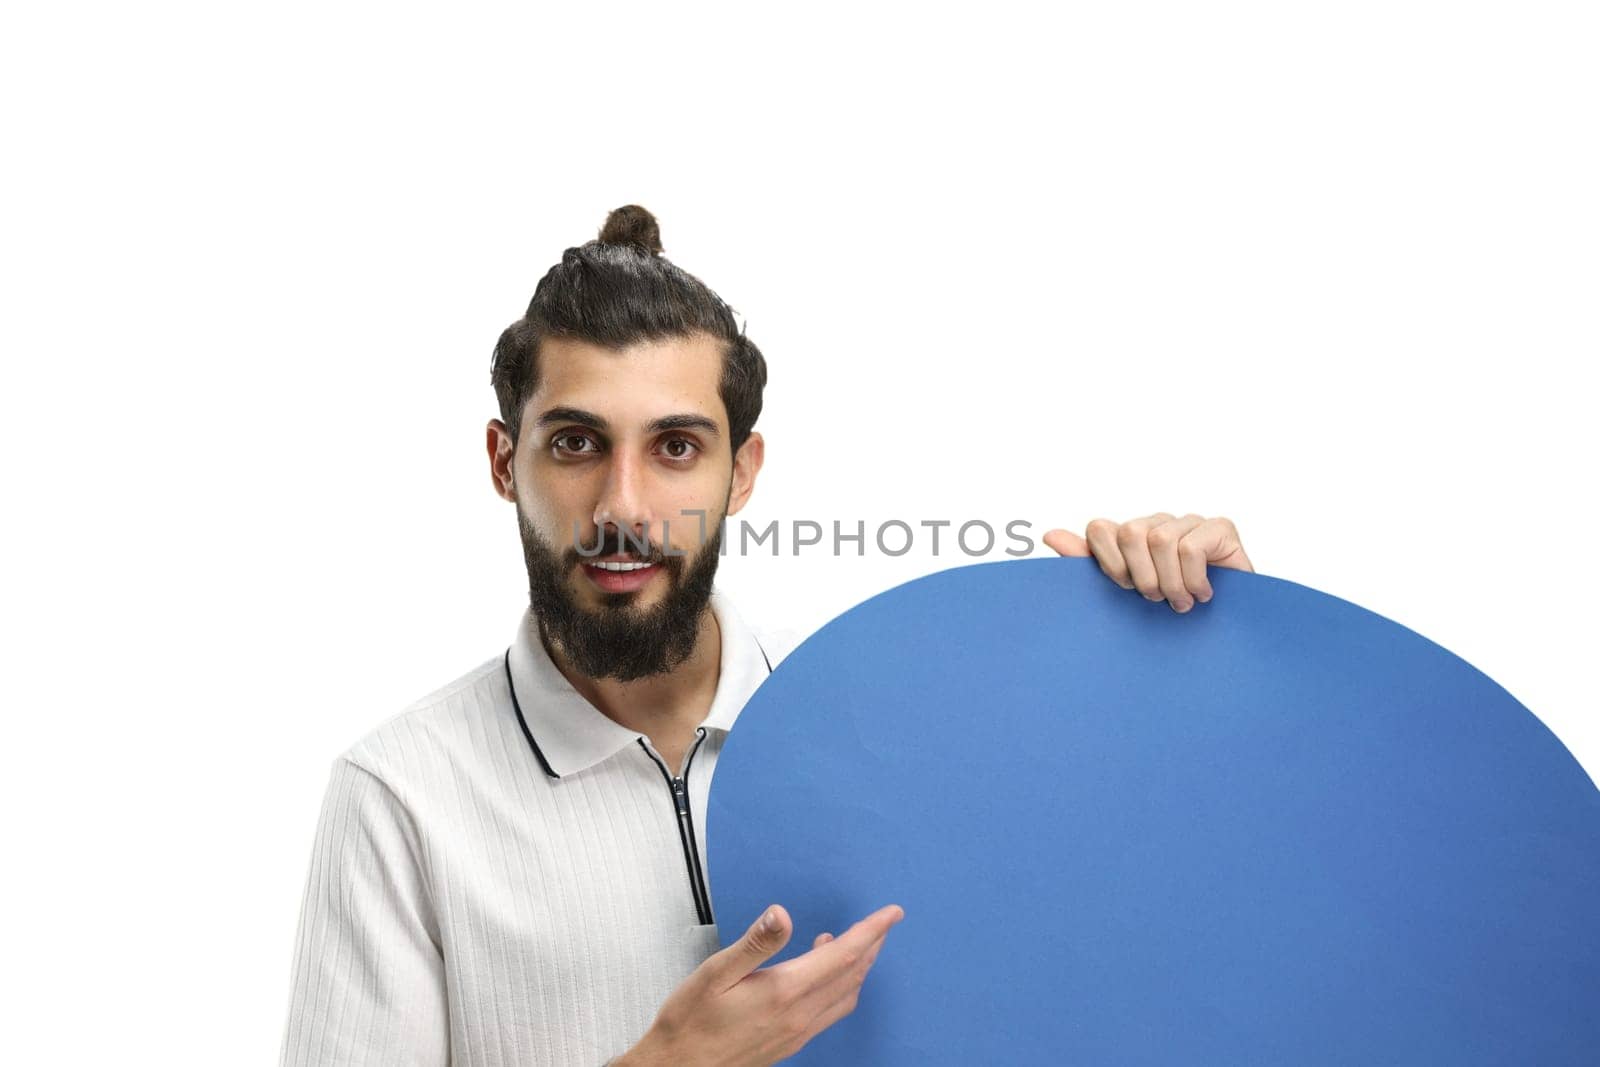 A man, close-up, on a white background, shows a blue comment sign by Prosto